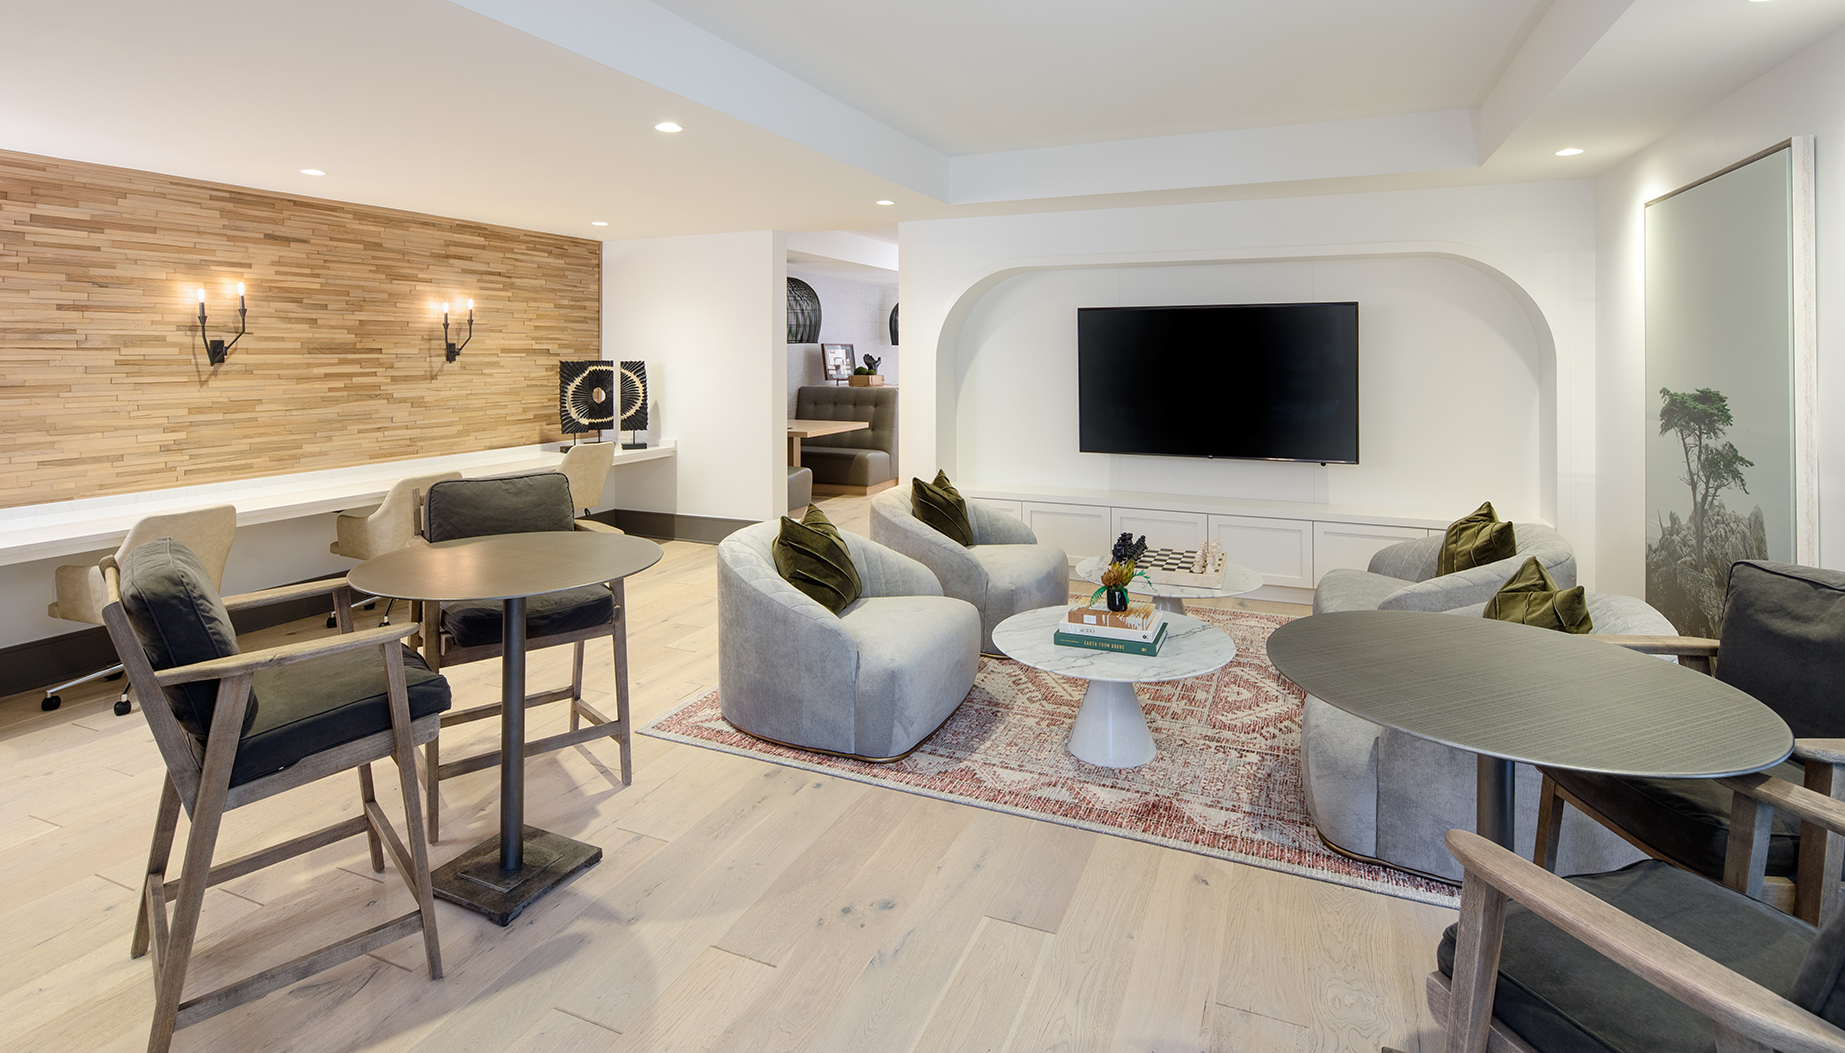 Vine North Hills remote work center with seating and TV